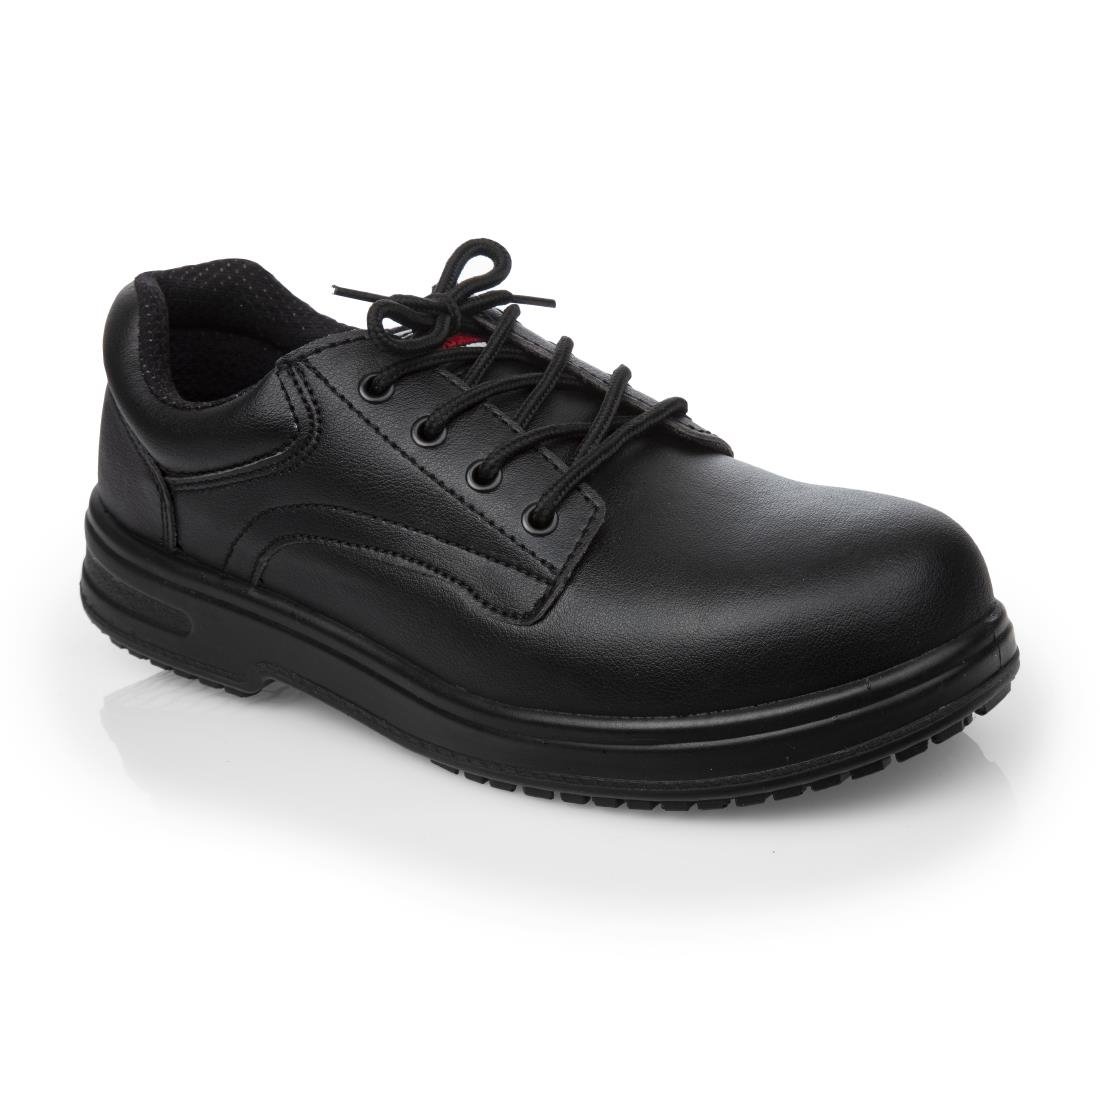 BB497-42 Slipbuster Basic Toe Cap Safety Shoes Black 42 JD Catering Equipment Solutions Ltd